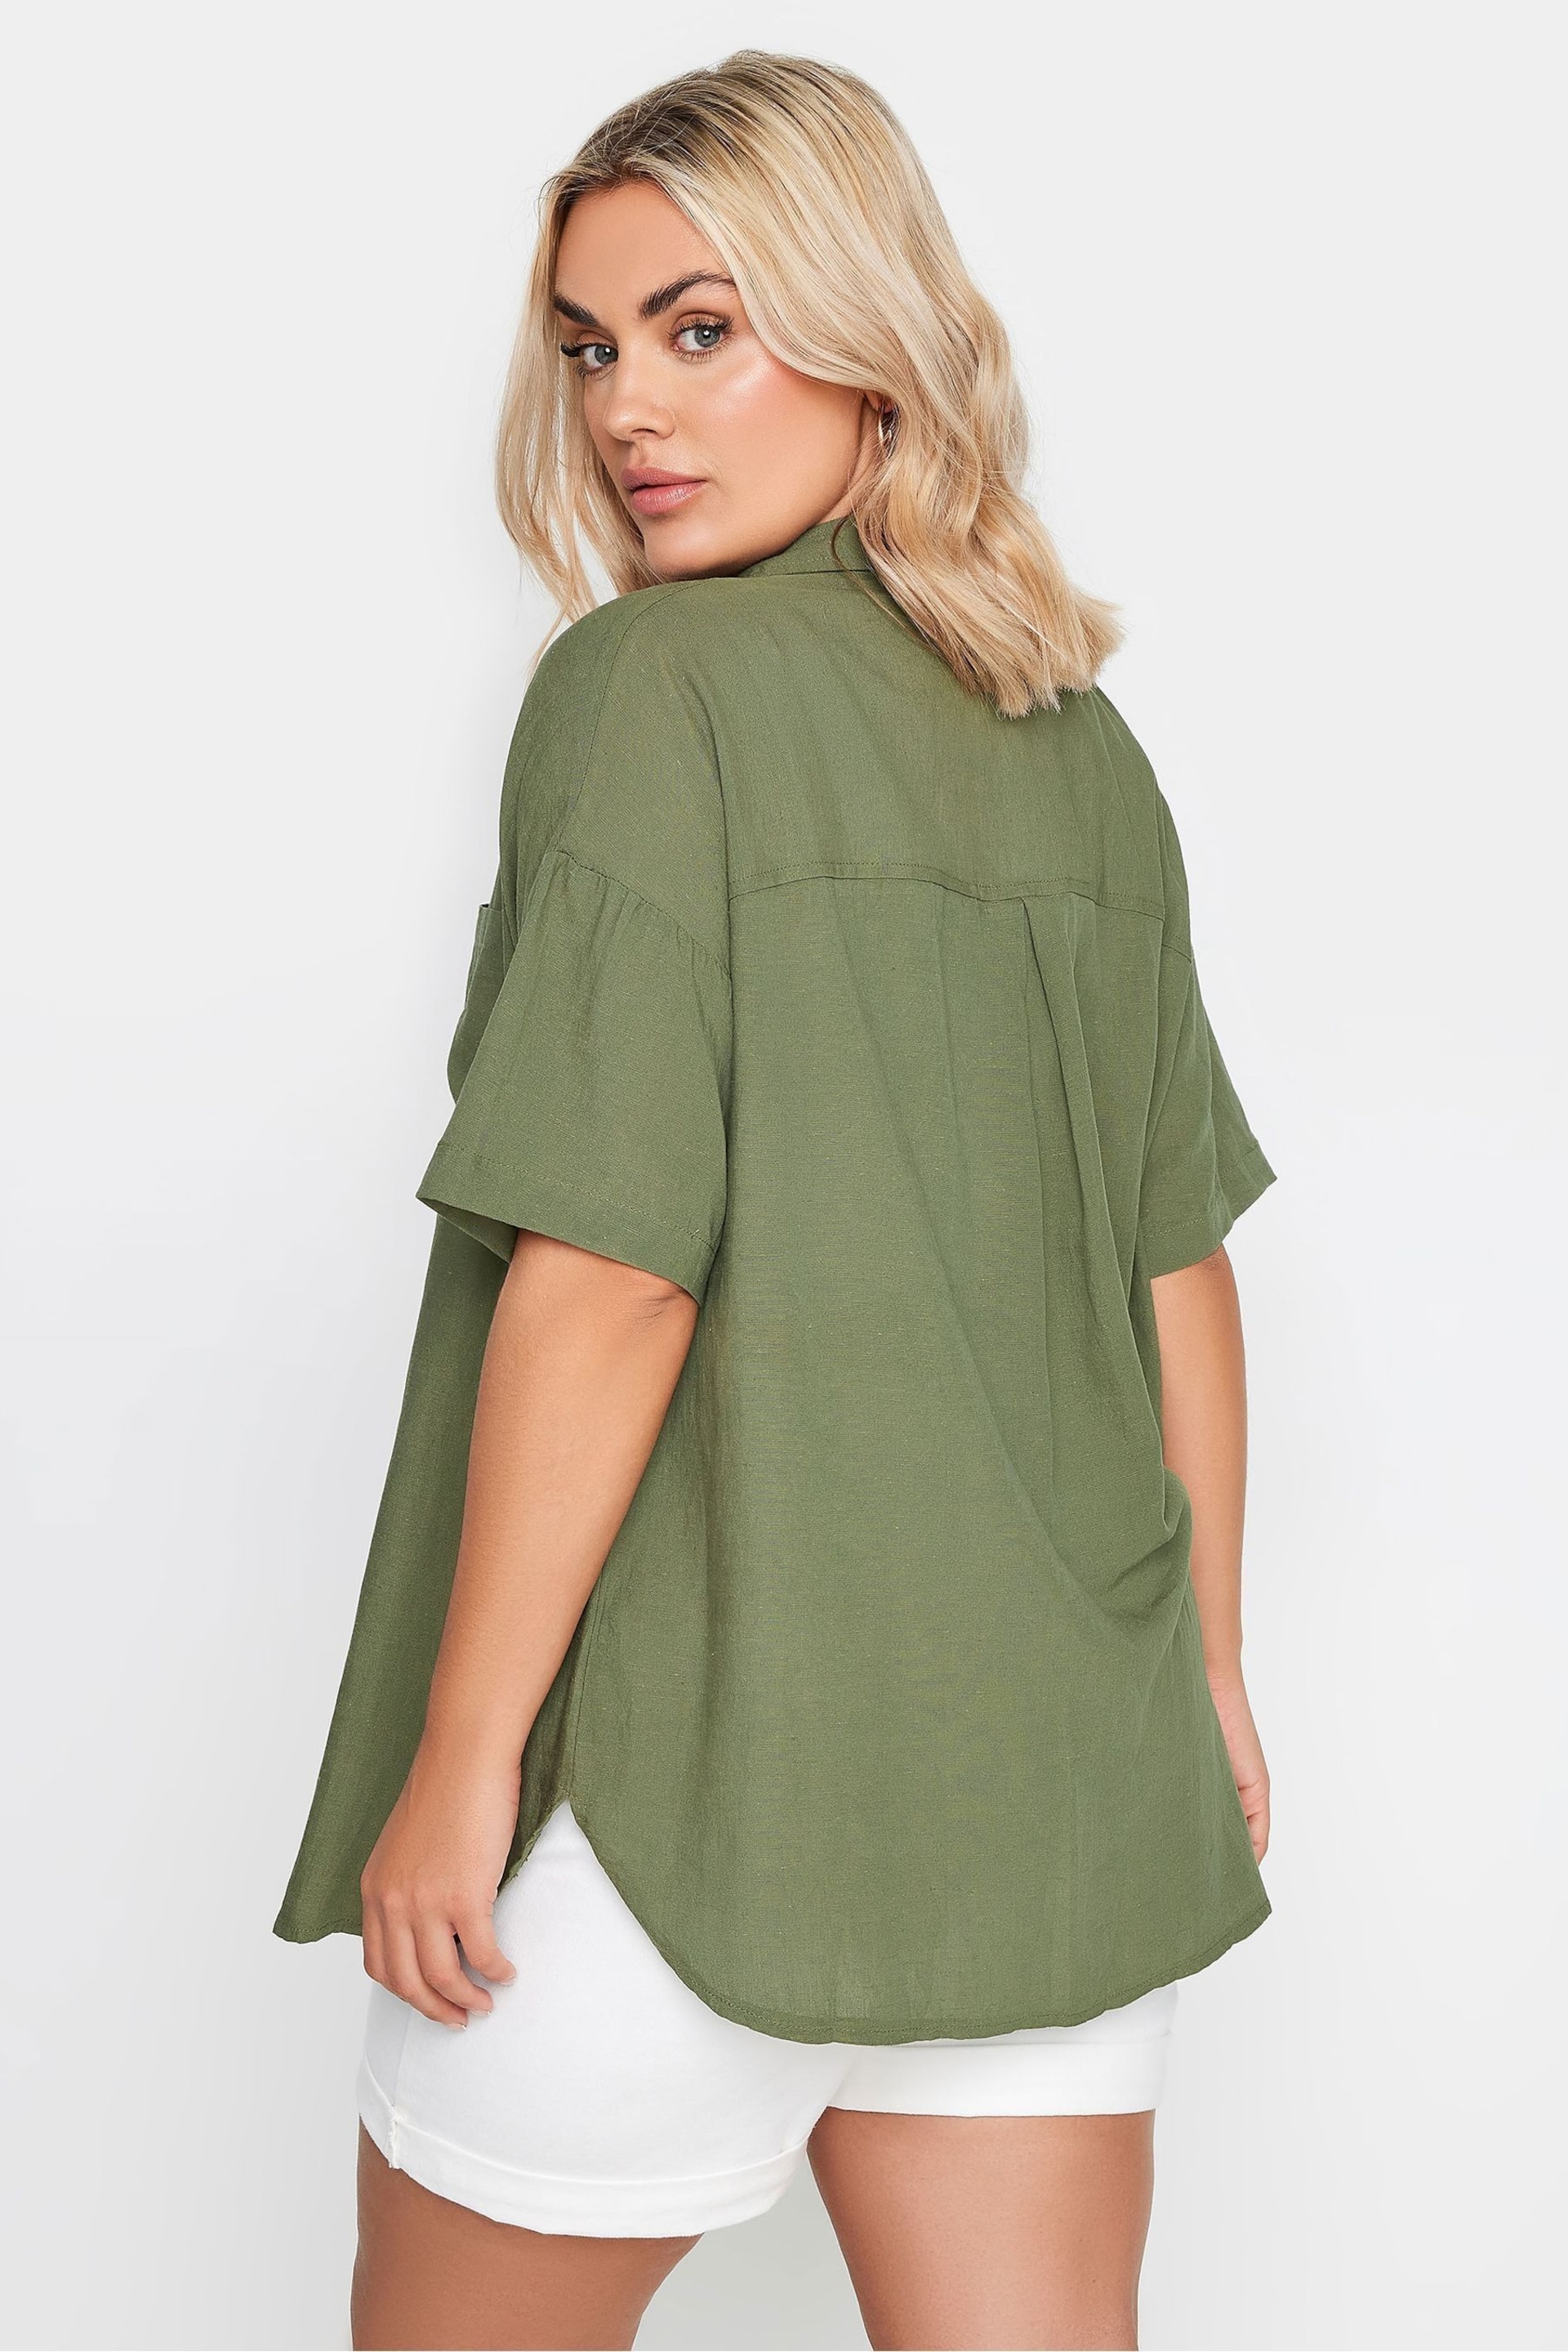 Yours Curve Khaki Green Utility Linen Shirt - Image 2 of 5